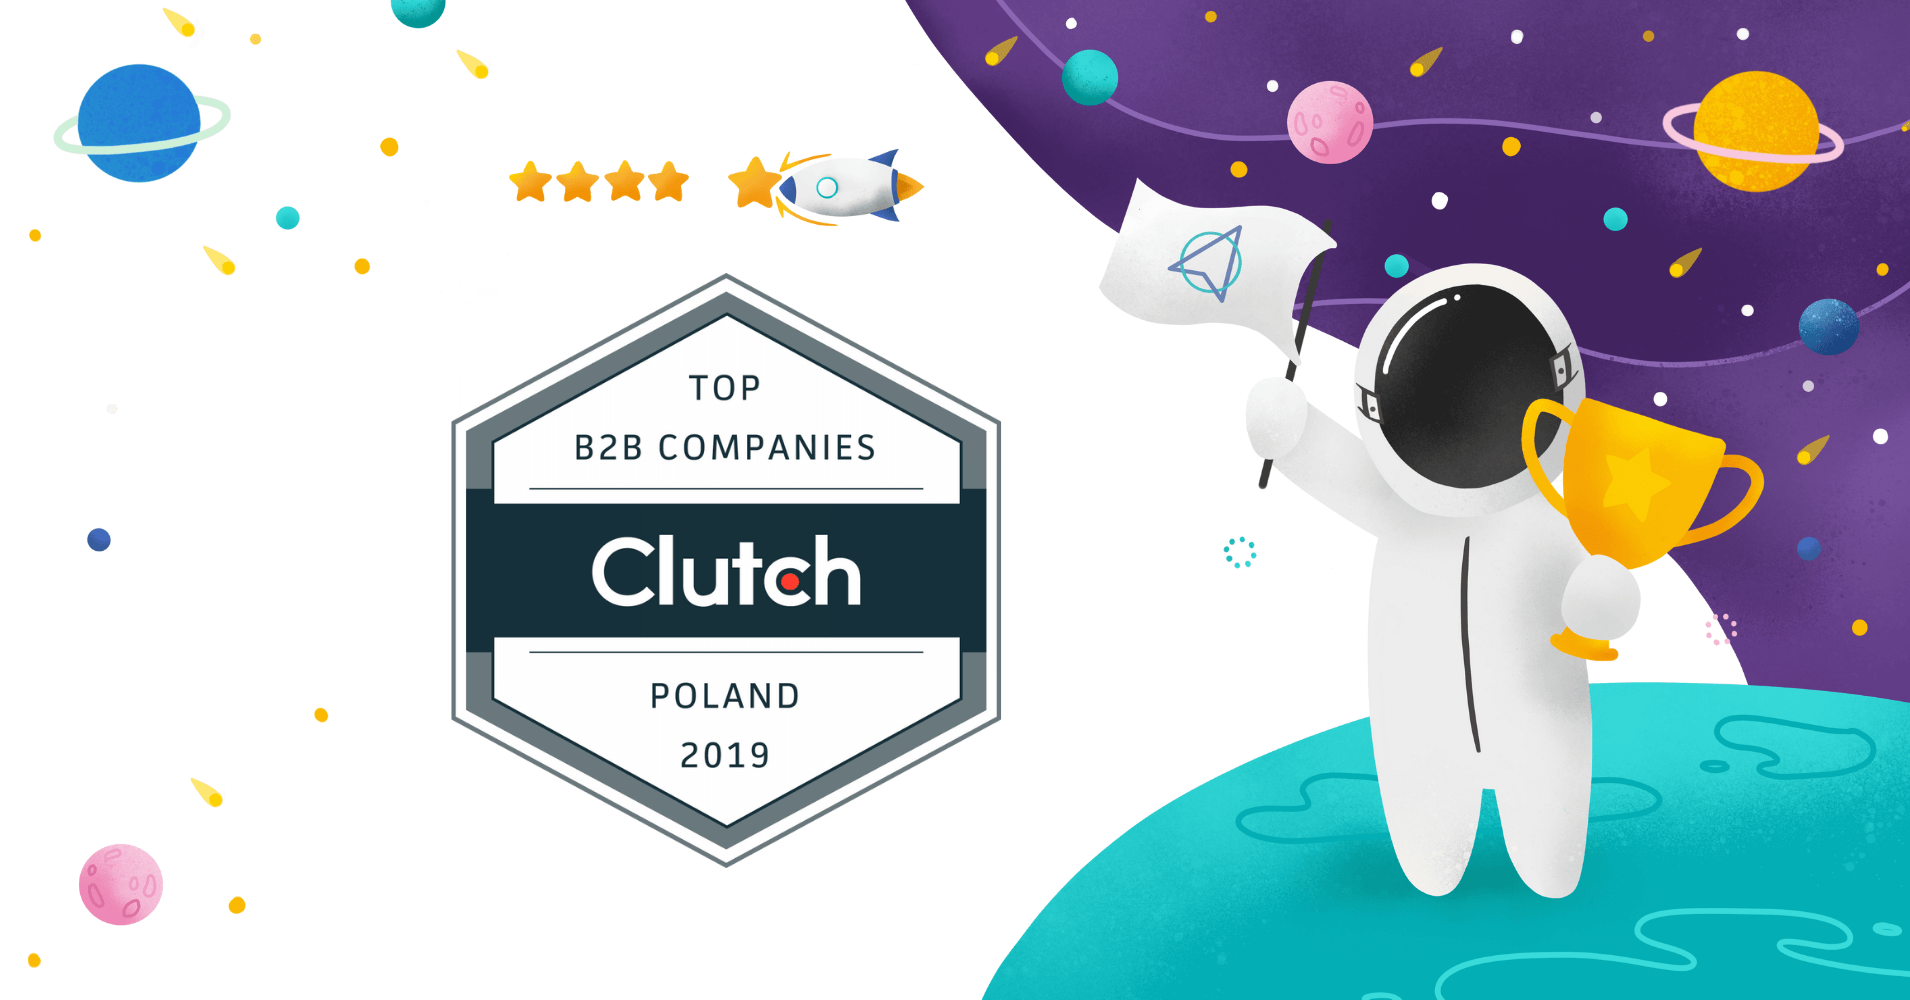 SPACE ADS Named Top Advertising & Marketing Partner in Poland by Clutch